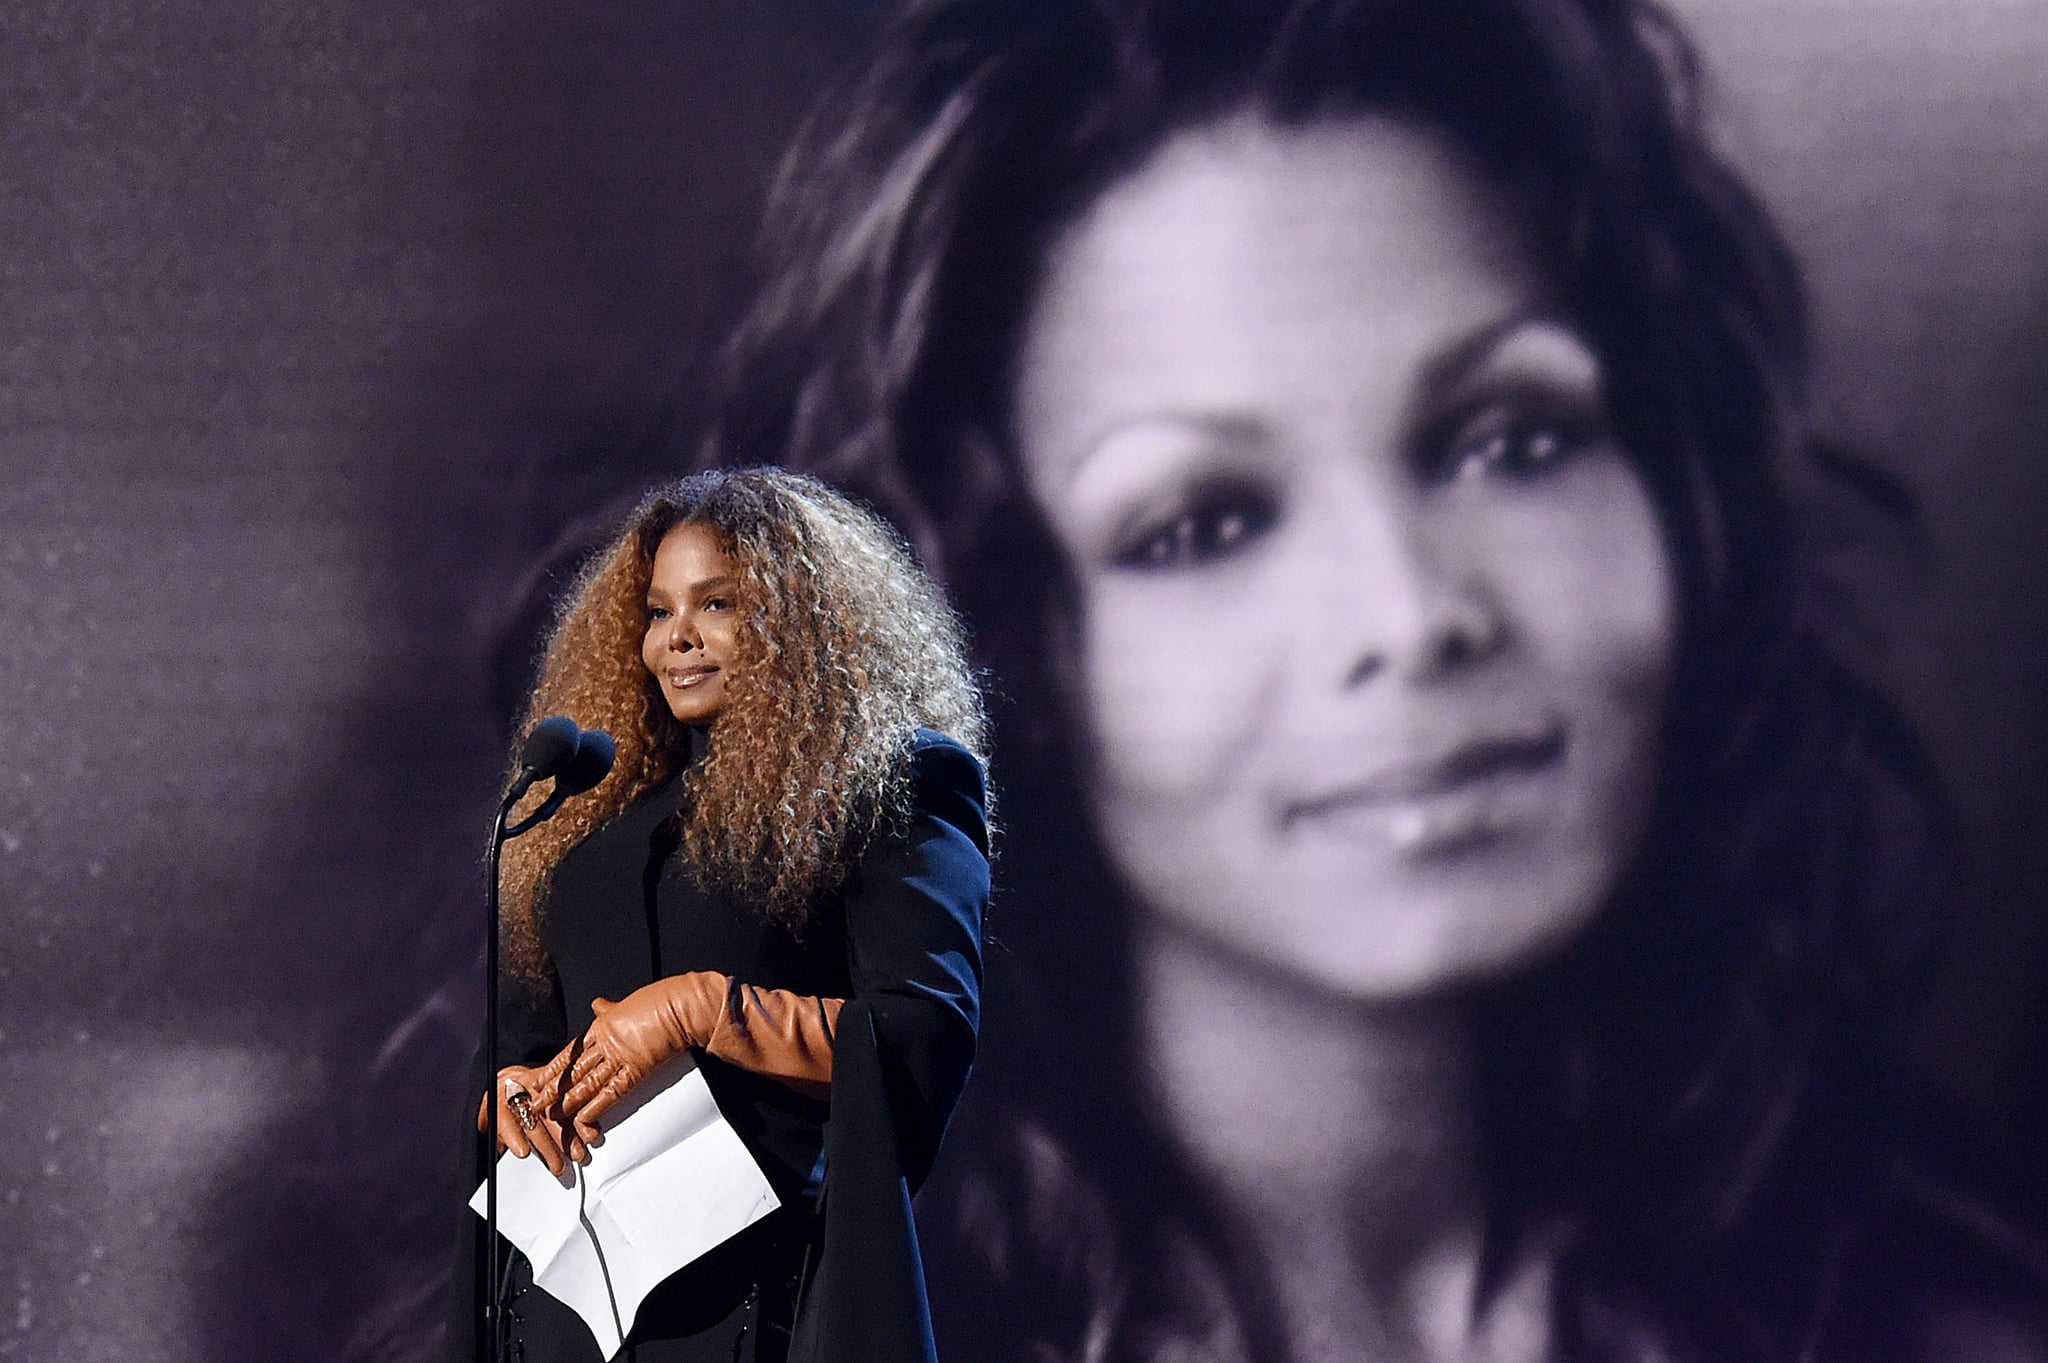 NEW YORK, NEW YORK - MARCH 29: Inductee Janet Jackson speaks onstage during the 2019 Rock & Roll Hall Of Fame Induction Ceremony - Show at Barclays Centre on March 29, 2019 in New York City. (Photo by Jamie McCarthy/Getty Images For The Rock and Roll Hall of Fame)